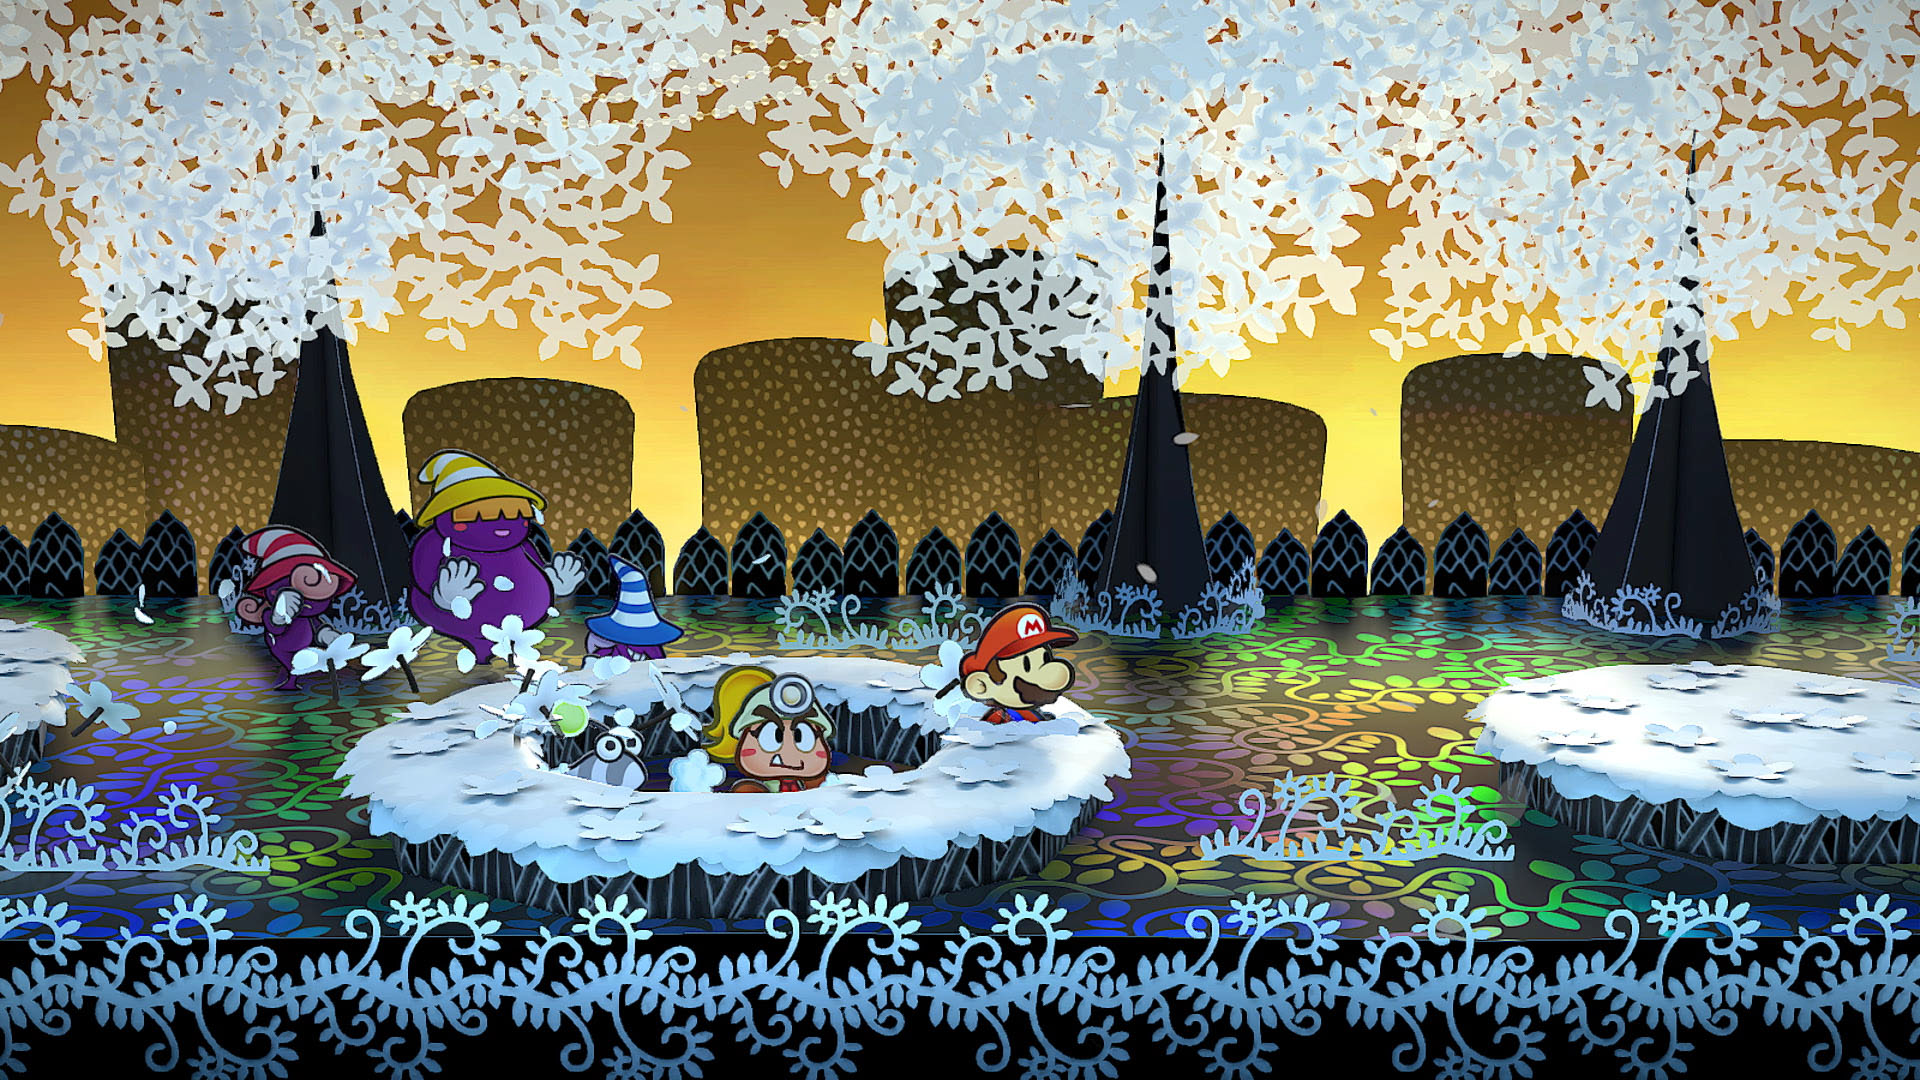 Paper Mario: The Thousand-Year Door will be released on 23 May, and Luigi's Mansion 2 HD - on 27 June